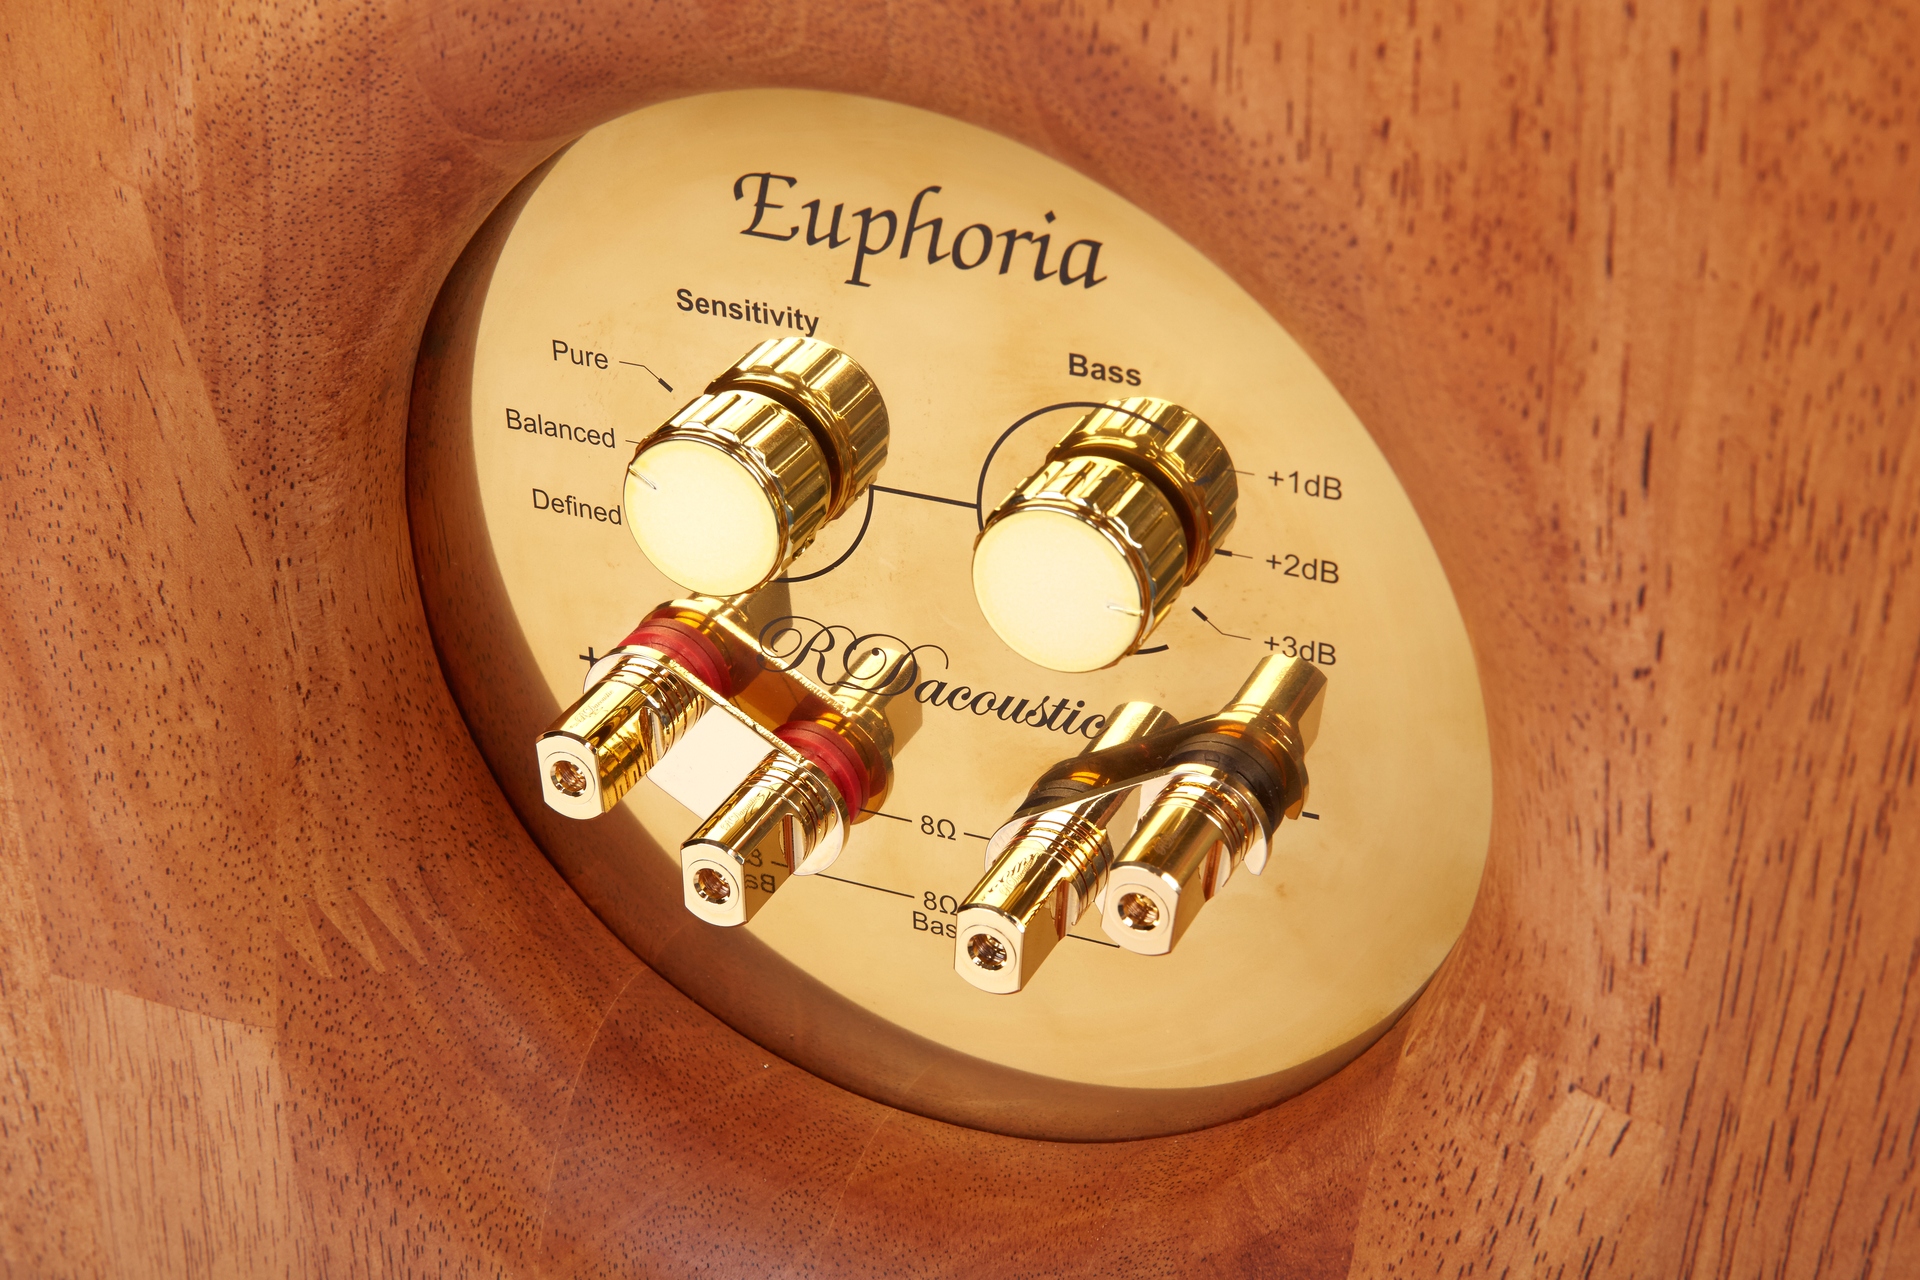 http://www.rdacoustic.cz/wp-content/uploads/RDacoustic_Speakers_Euphoria_Terminal_Detail_Small-1.jpg